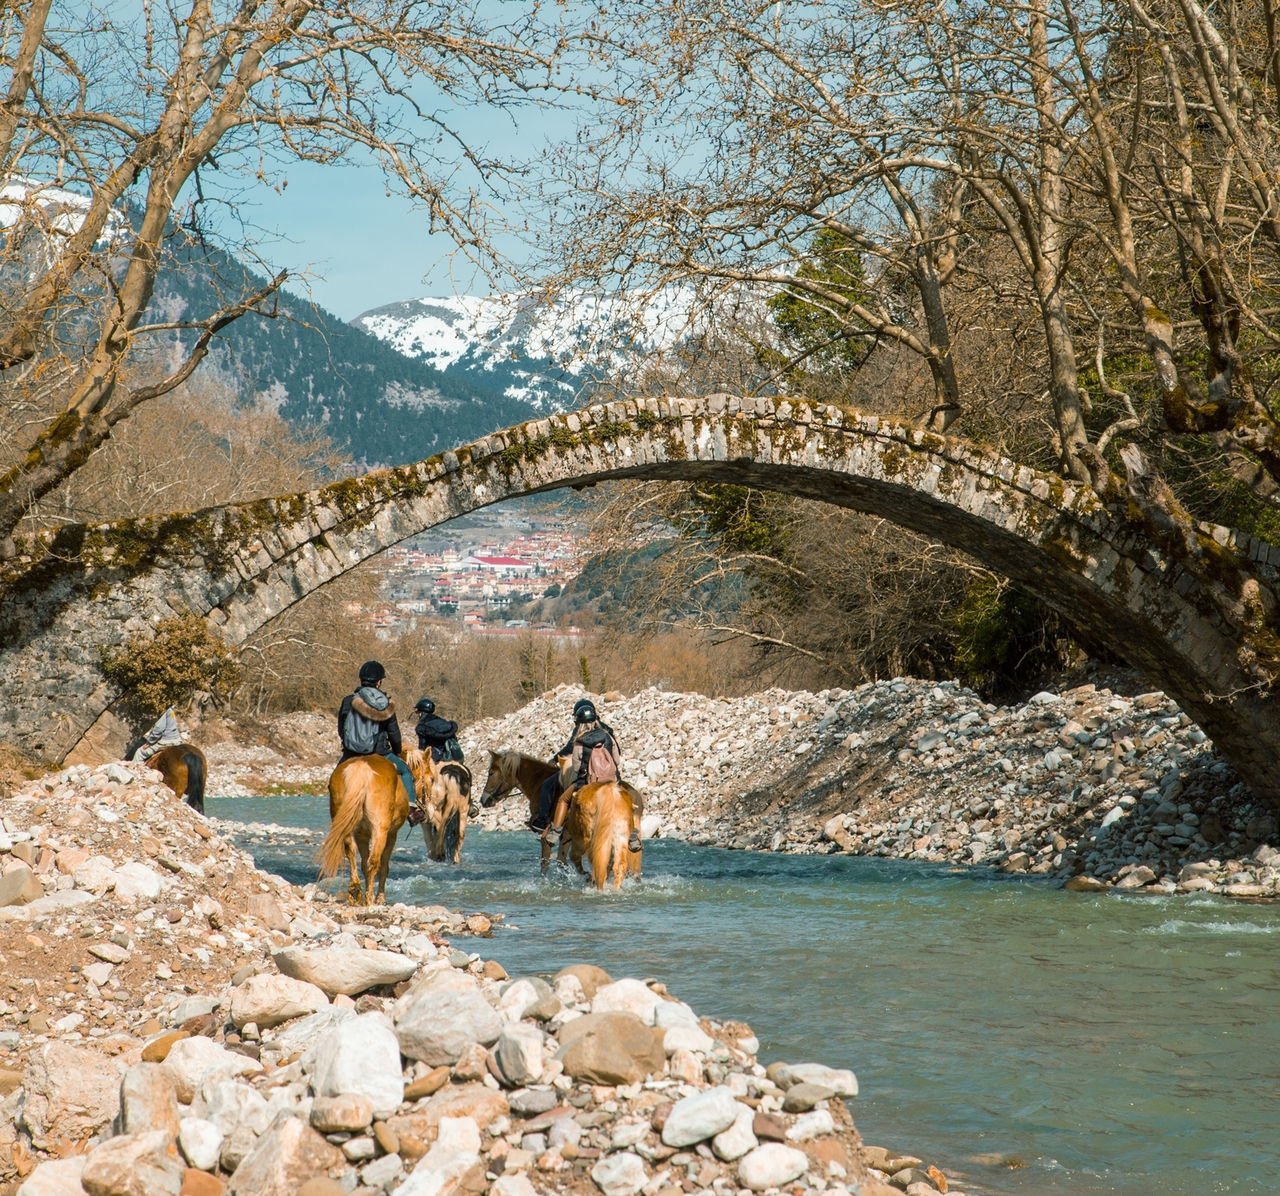 Multiple footpaths allow you to explore the countryside of Central greece